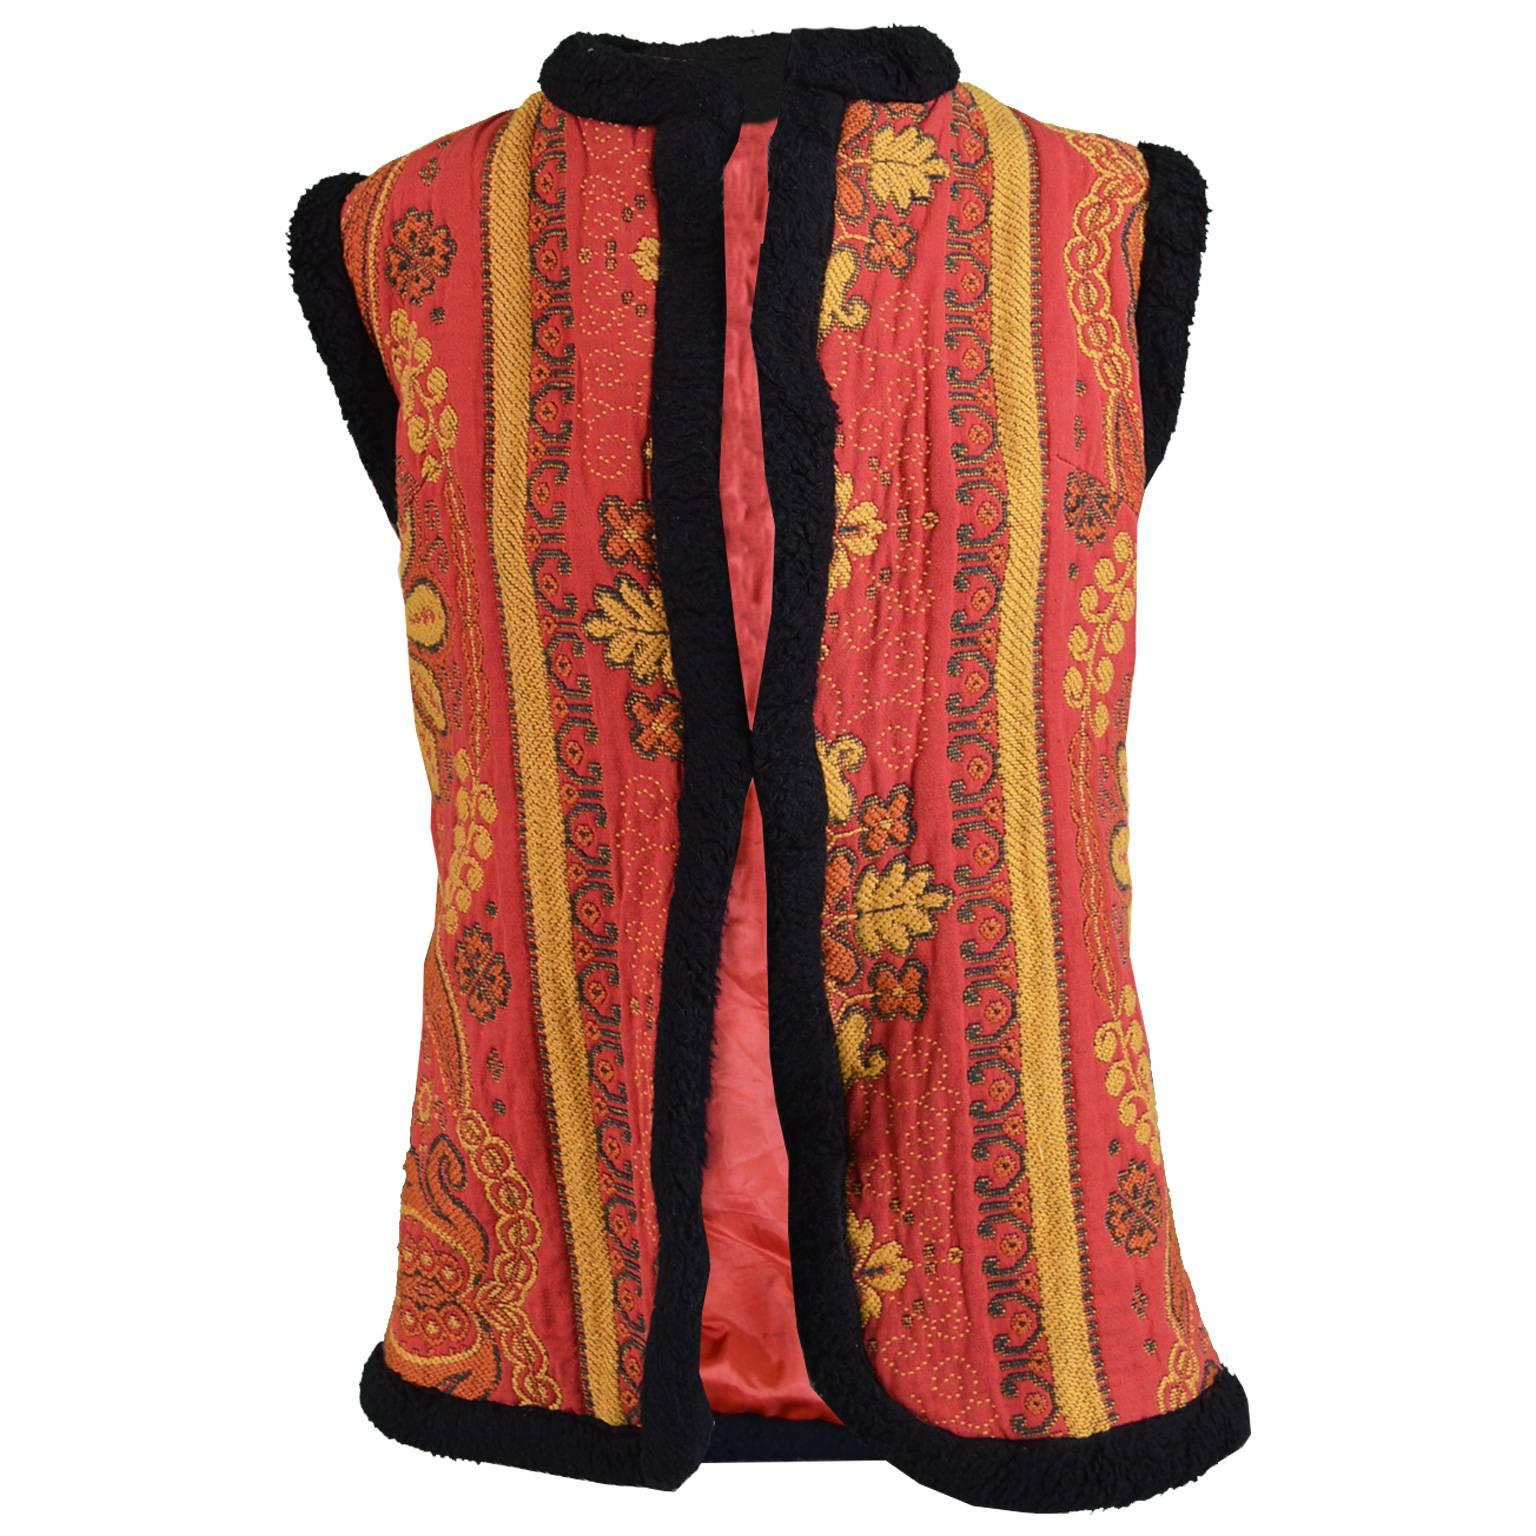 Manon Maid Vintage Hippie Red & Black Afghan Style Floral Tapestry Vest, 1960s